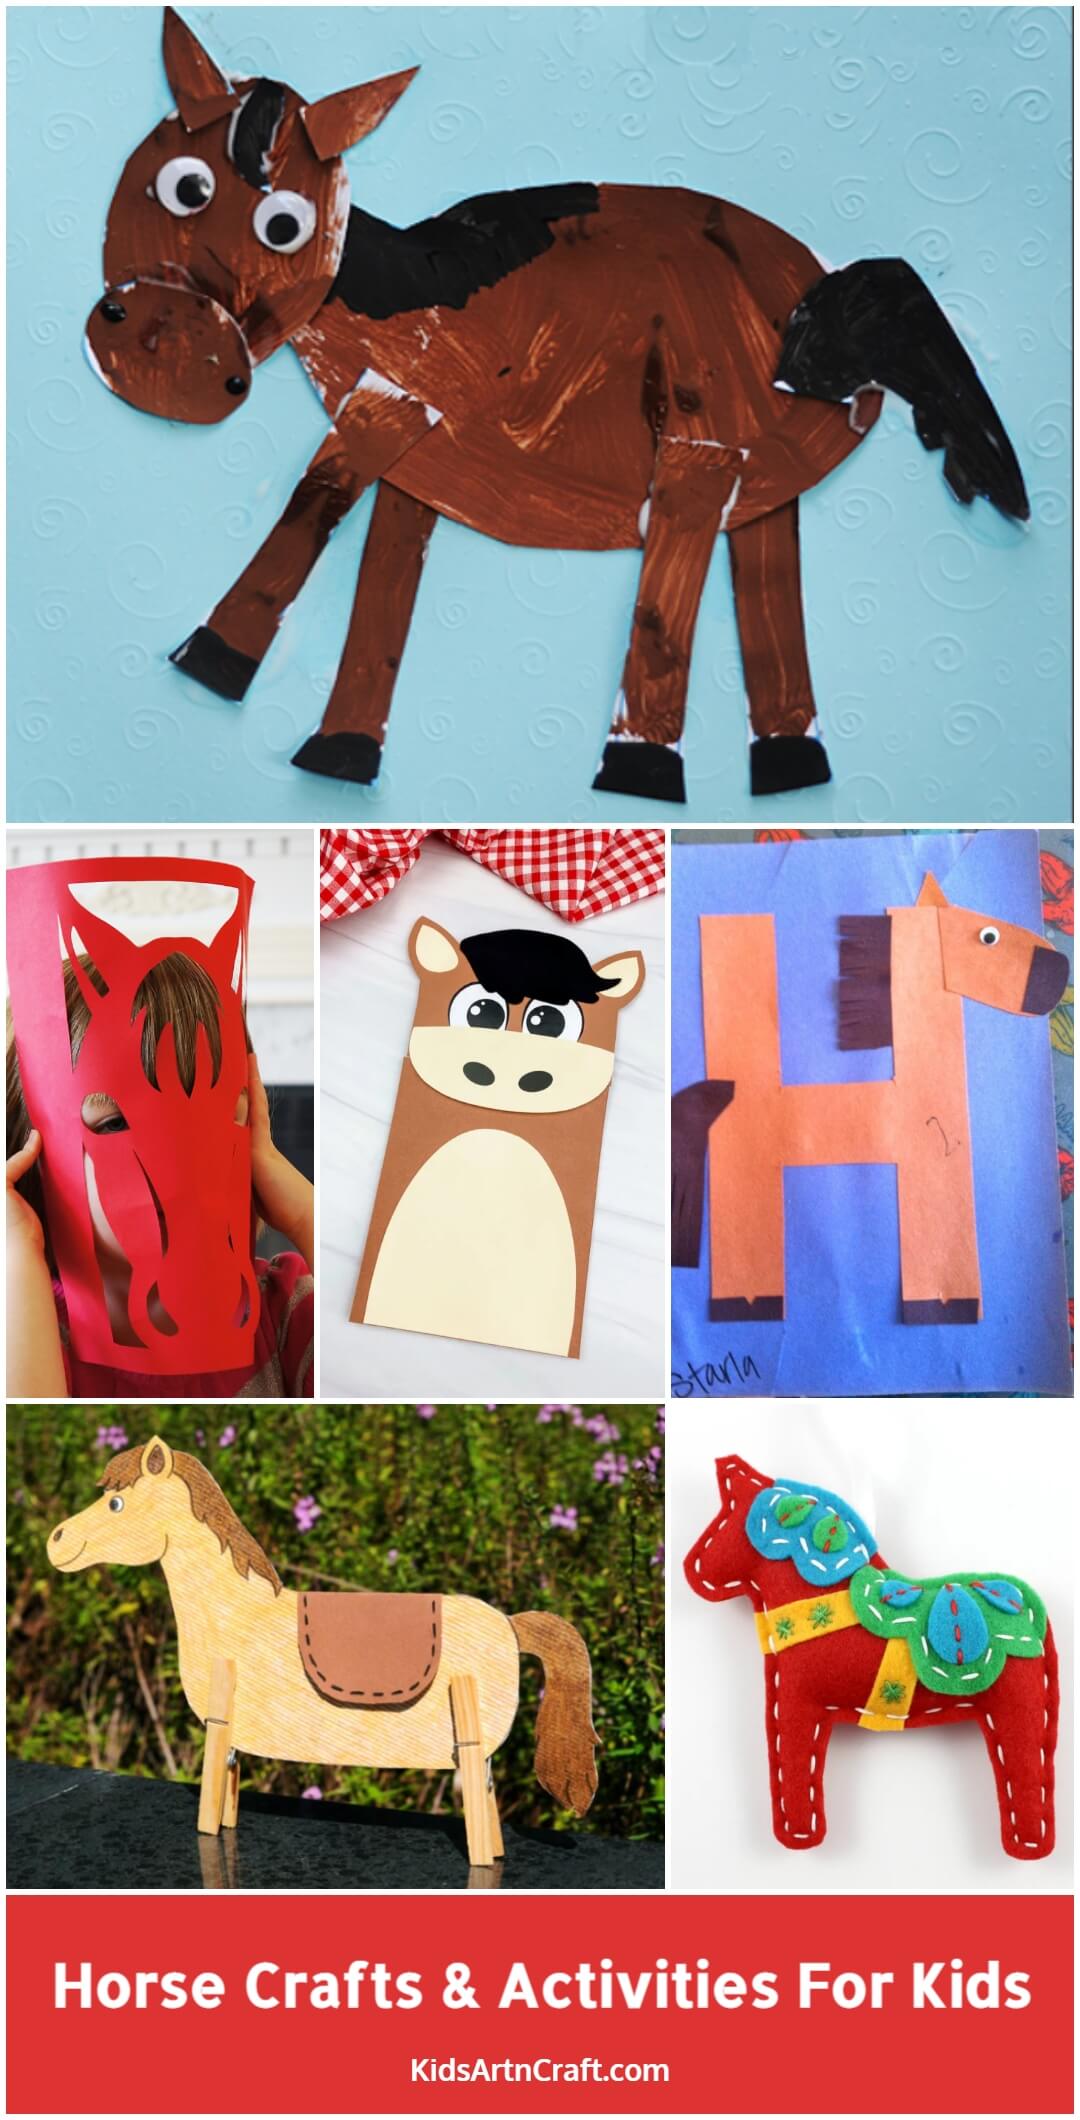 Horse Crafts & Activities for Kids